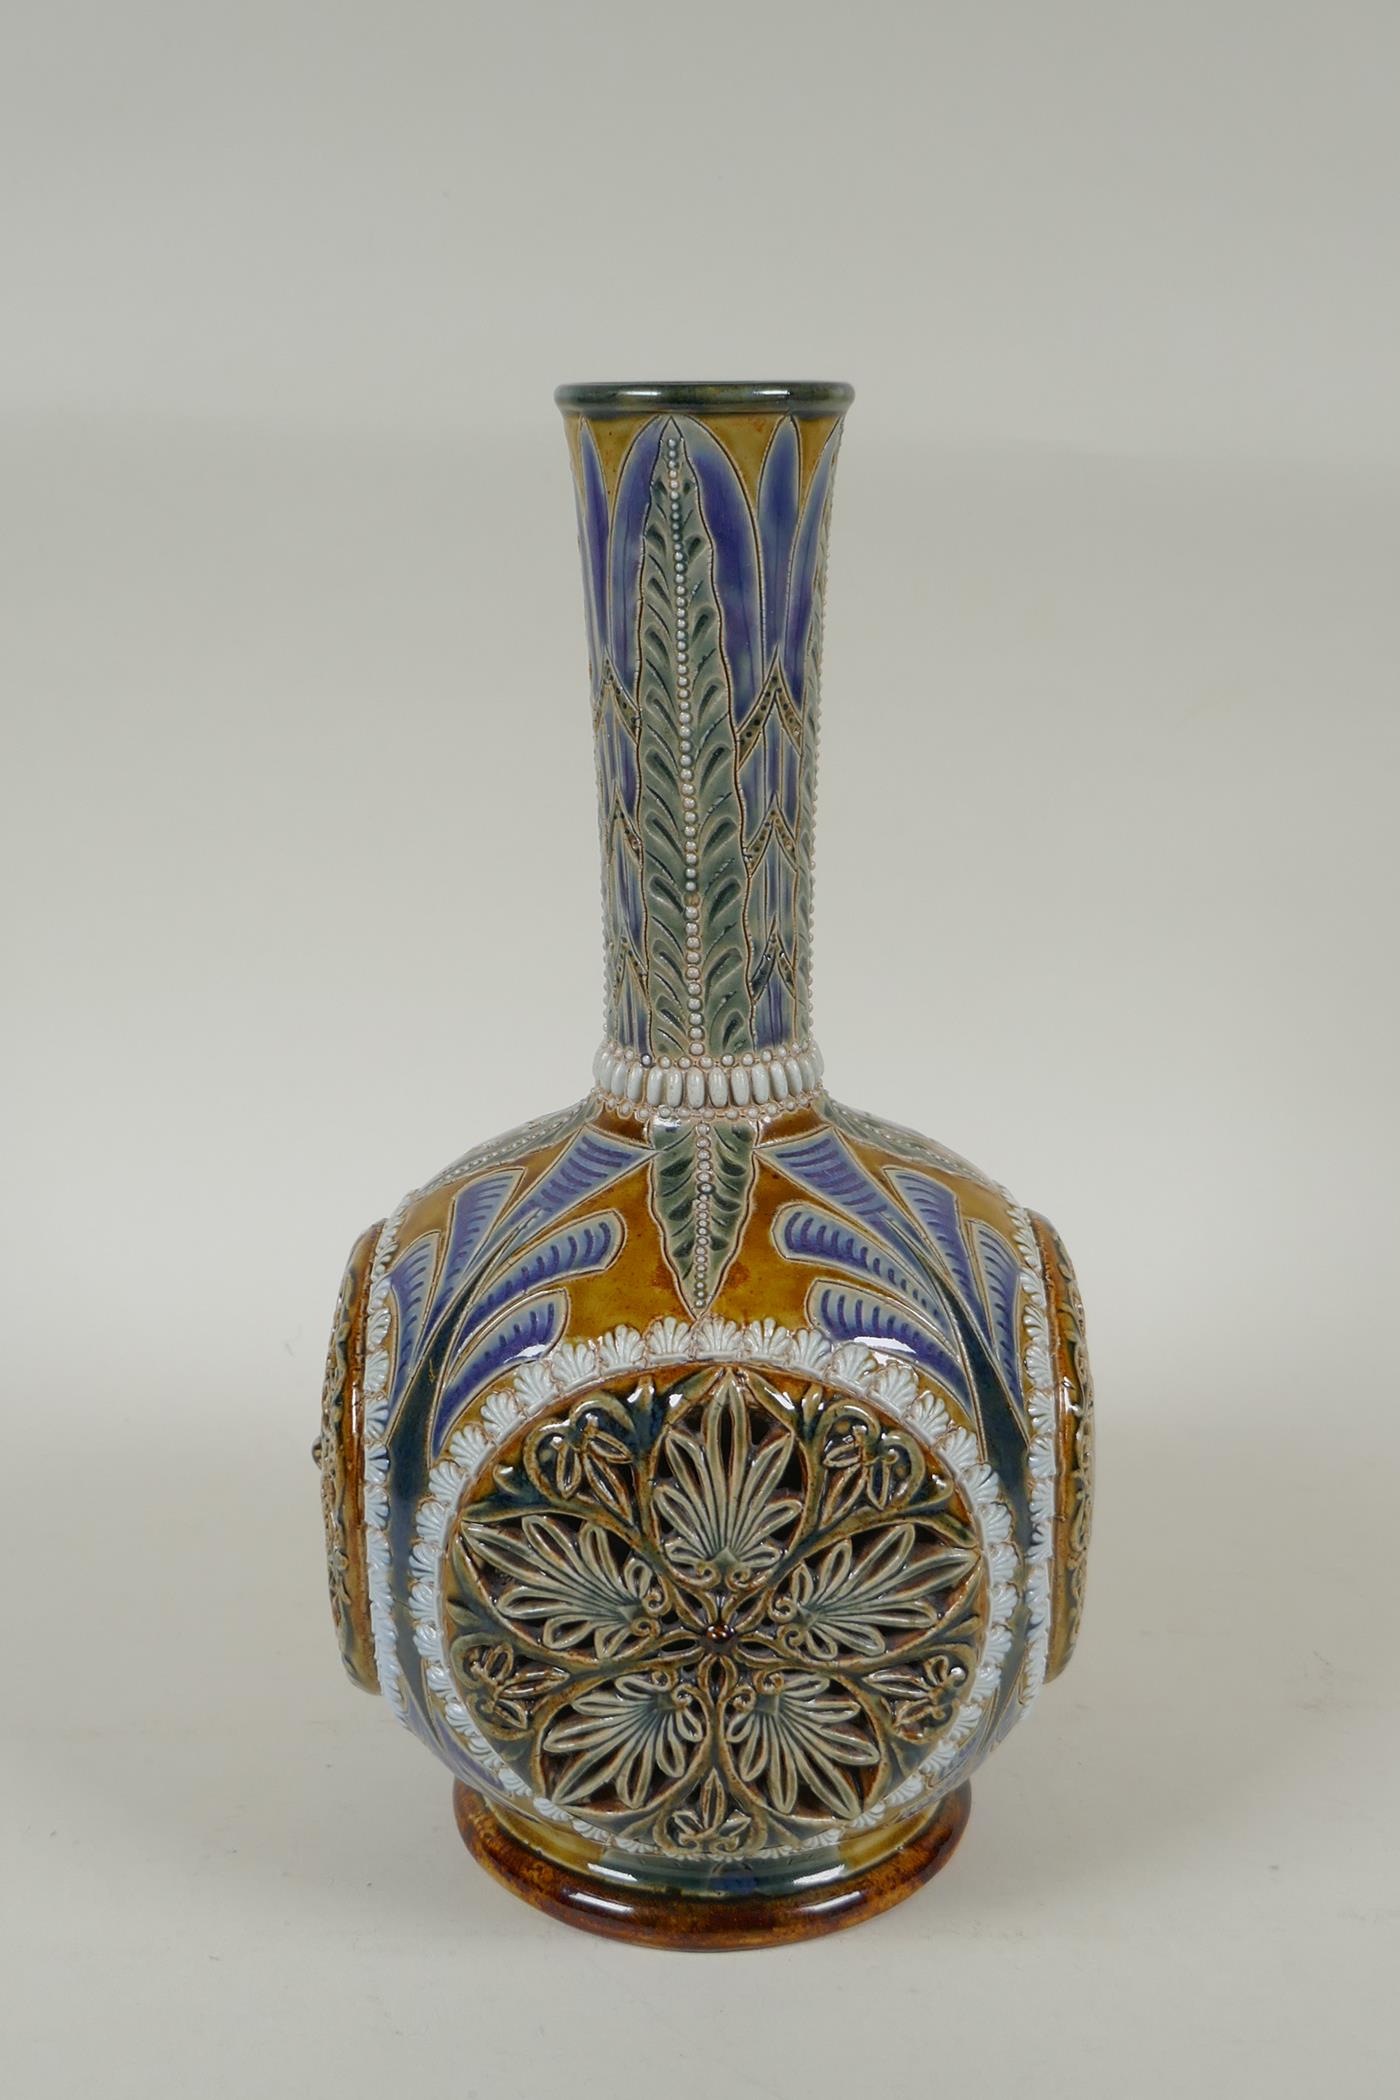 A C19th Doulton Lambeth stoneware vase by Emily E. Stormer, decorated with raised reticulated floral - Image 4 of 9